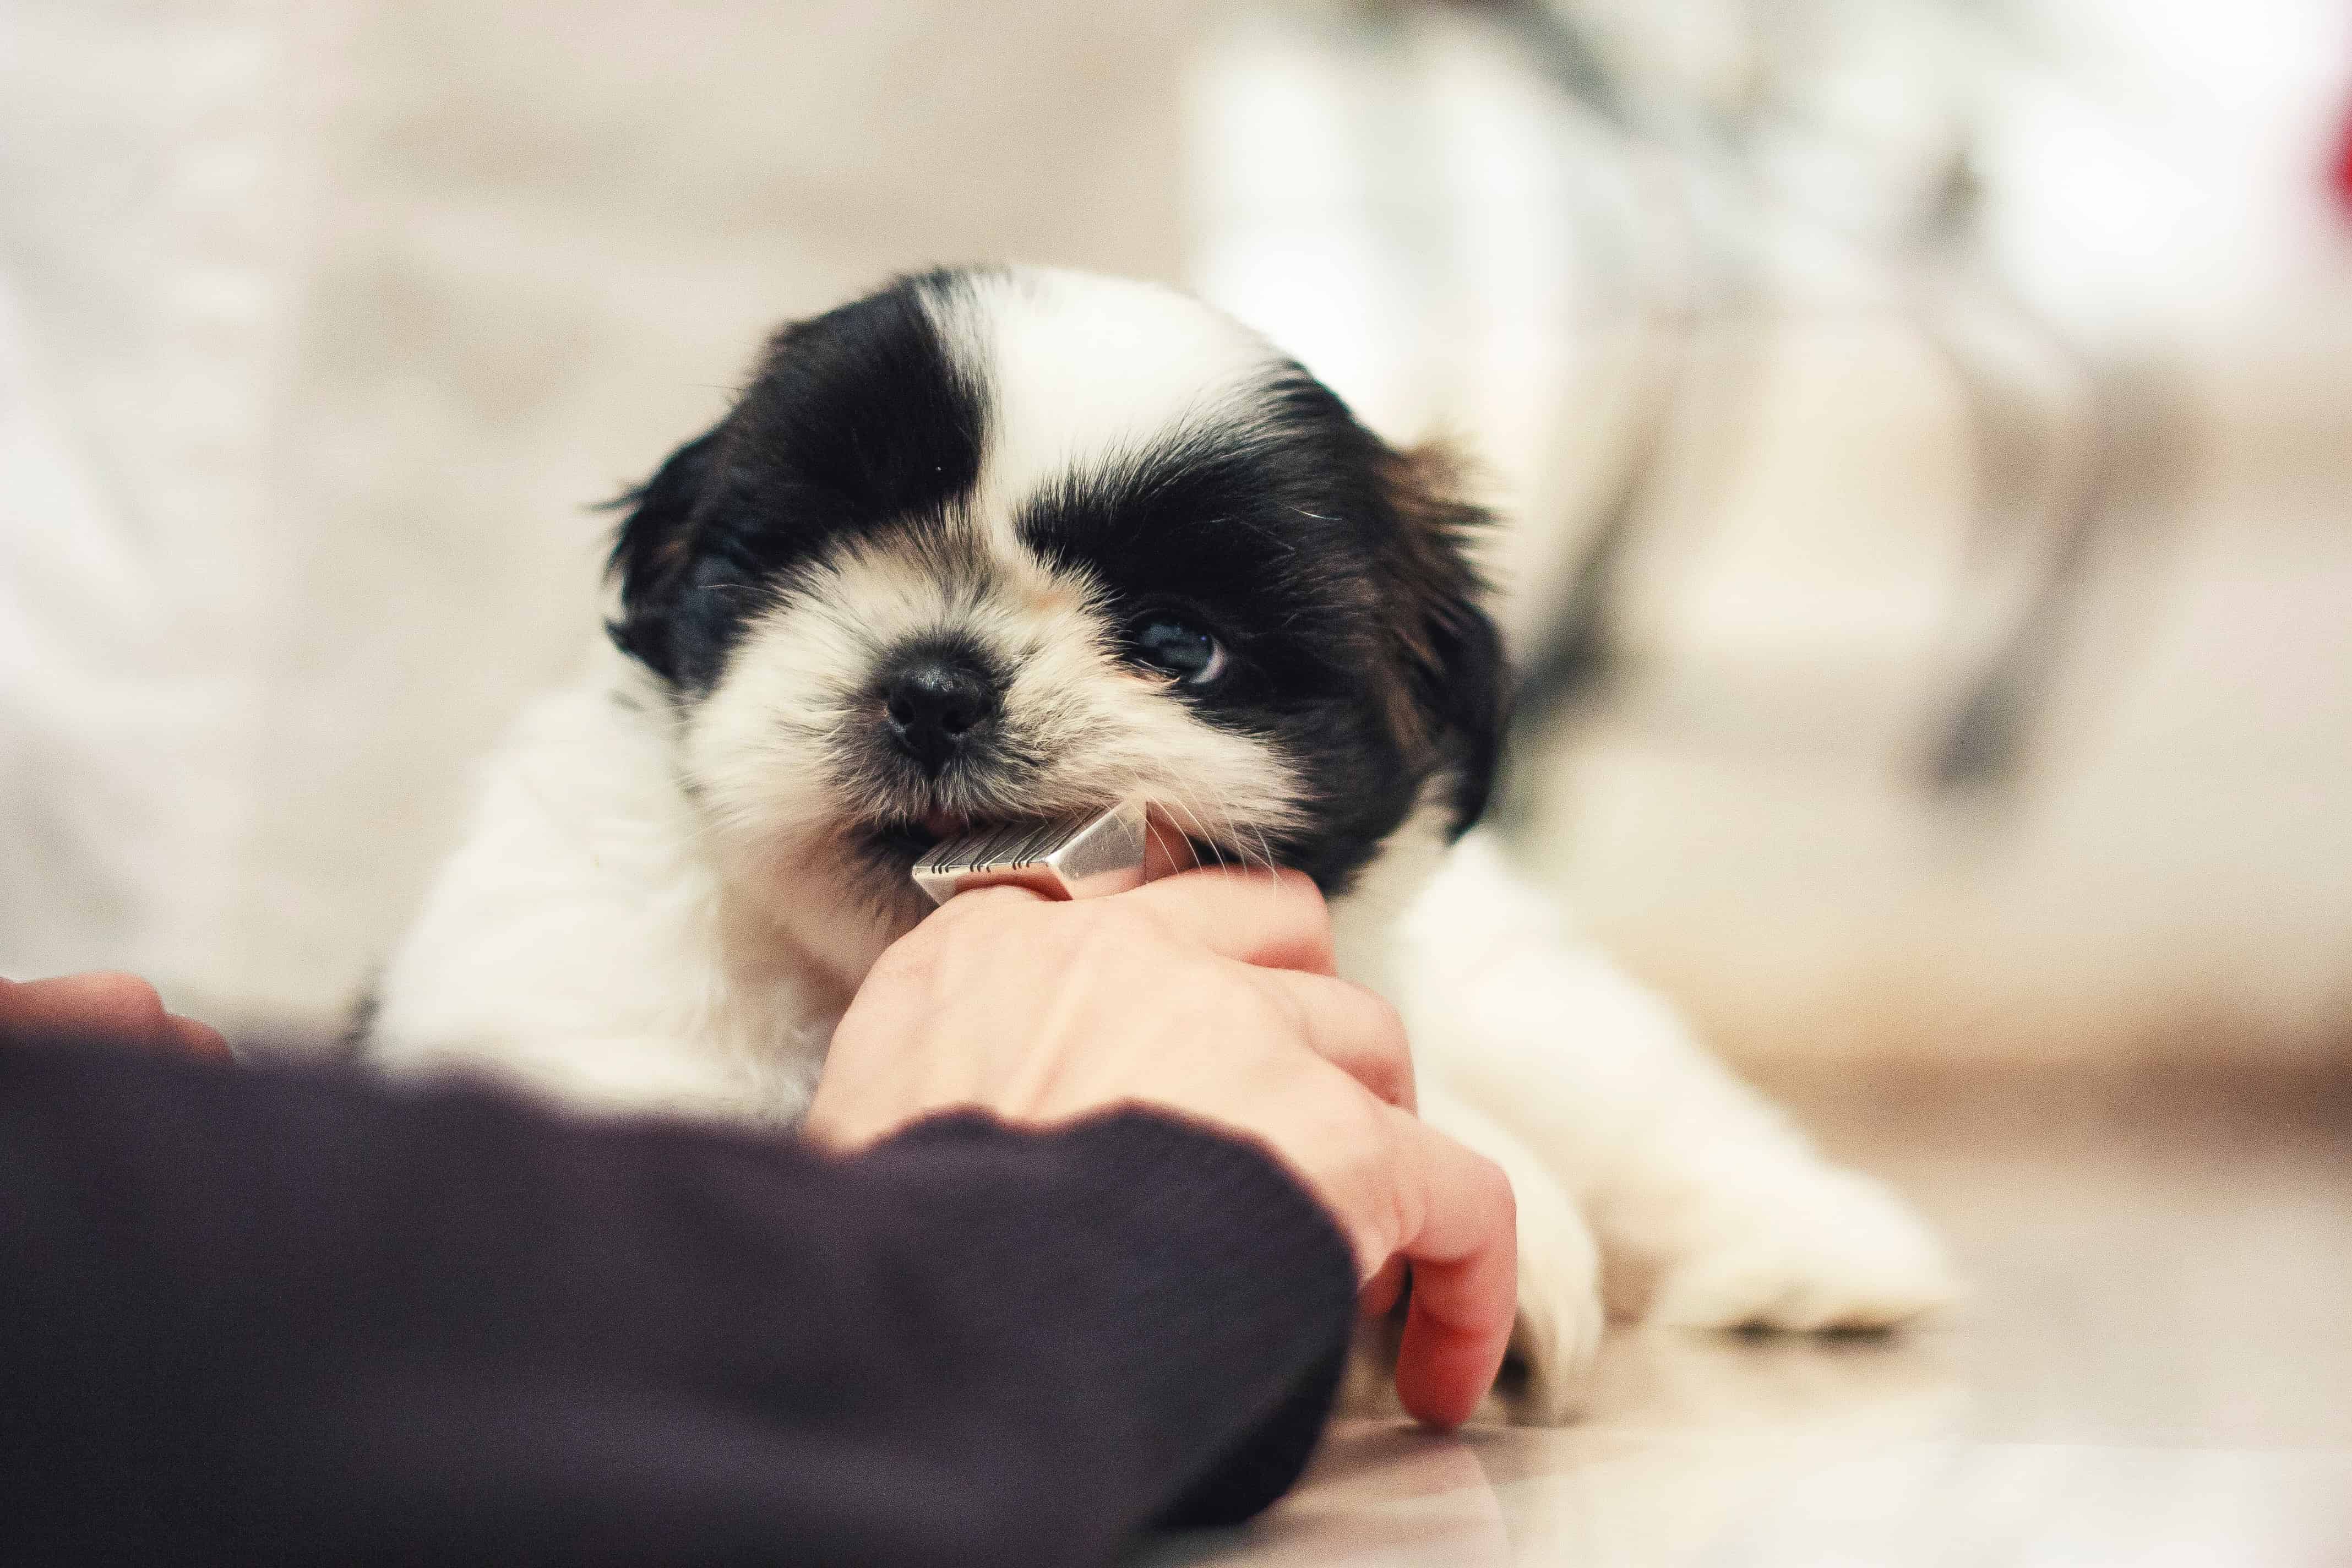 Cutie Lhasa Apso chewing on Finger